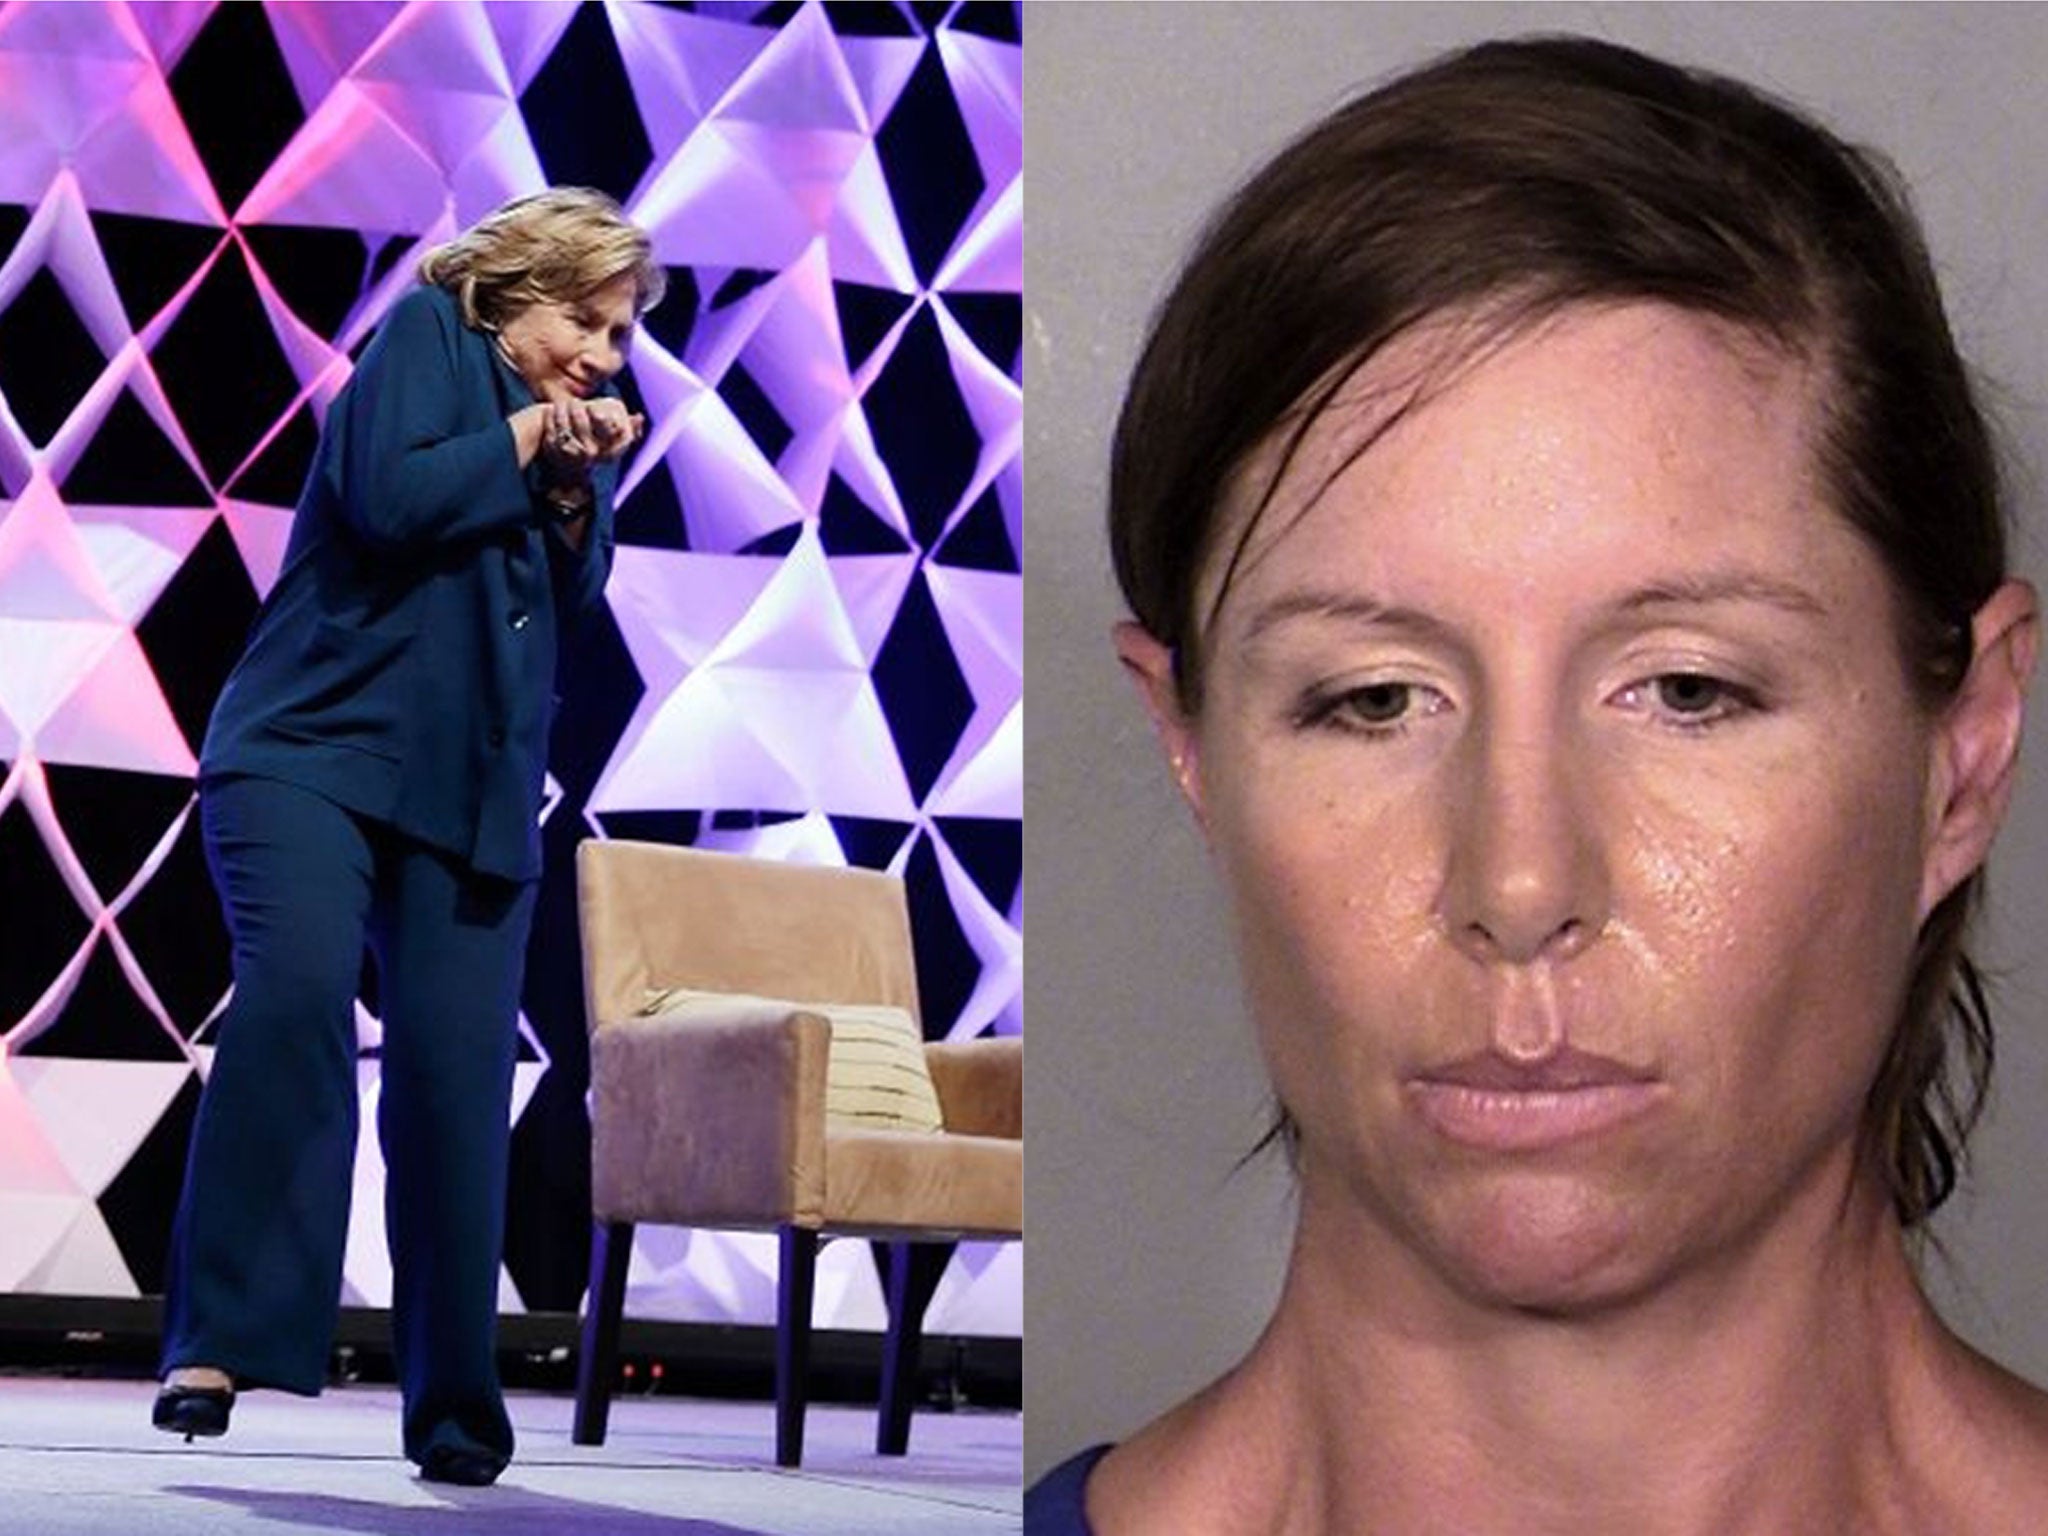 Woman who threw shoe at Hilary Clinton 